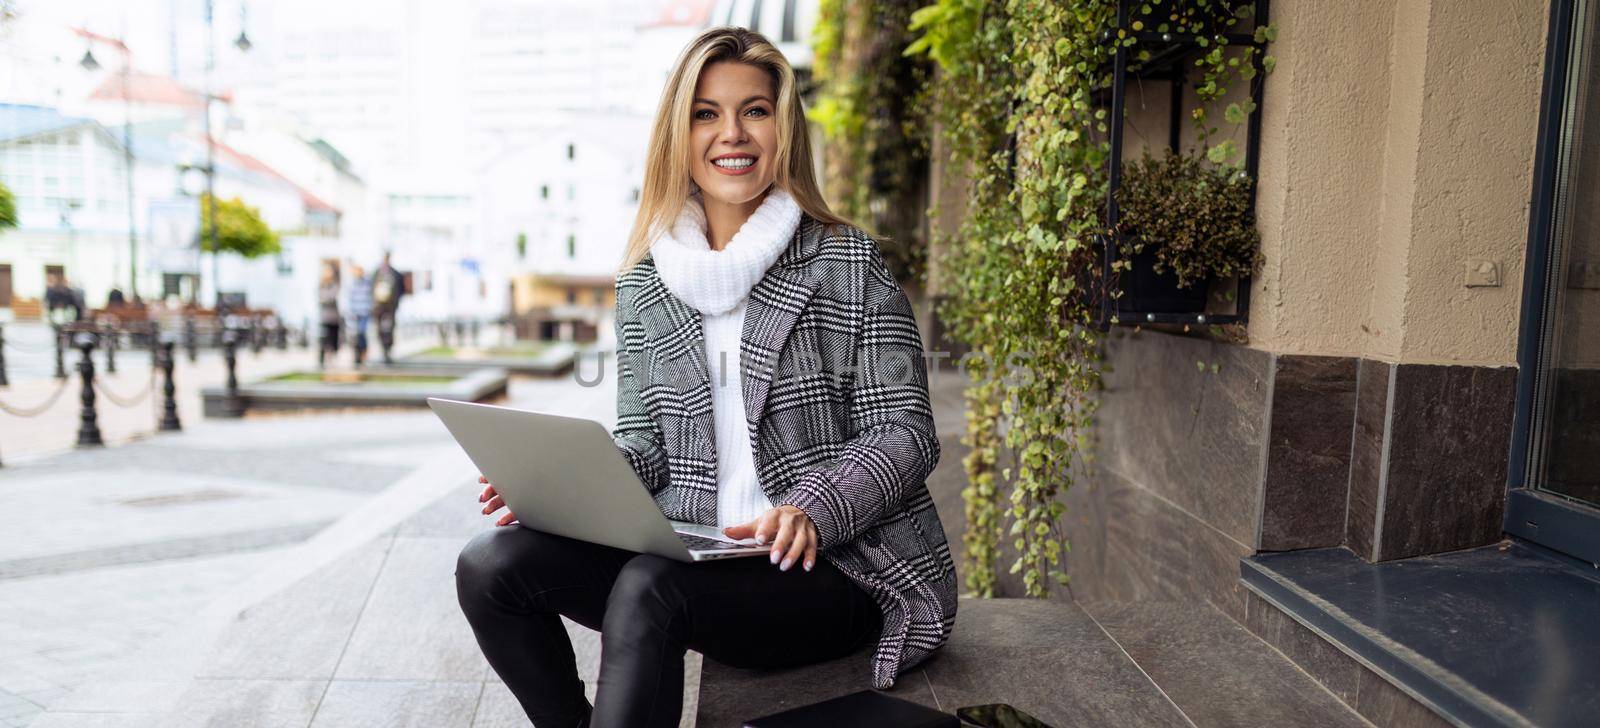 adult woman working on laptop outside office sitting on steps smiling looking at camera.